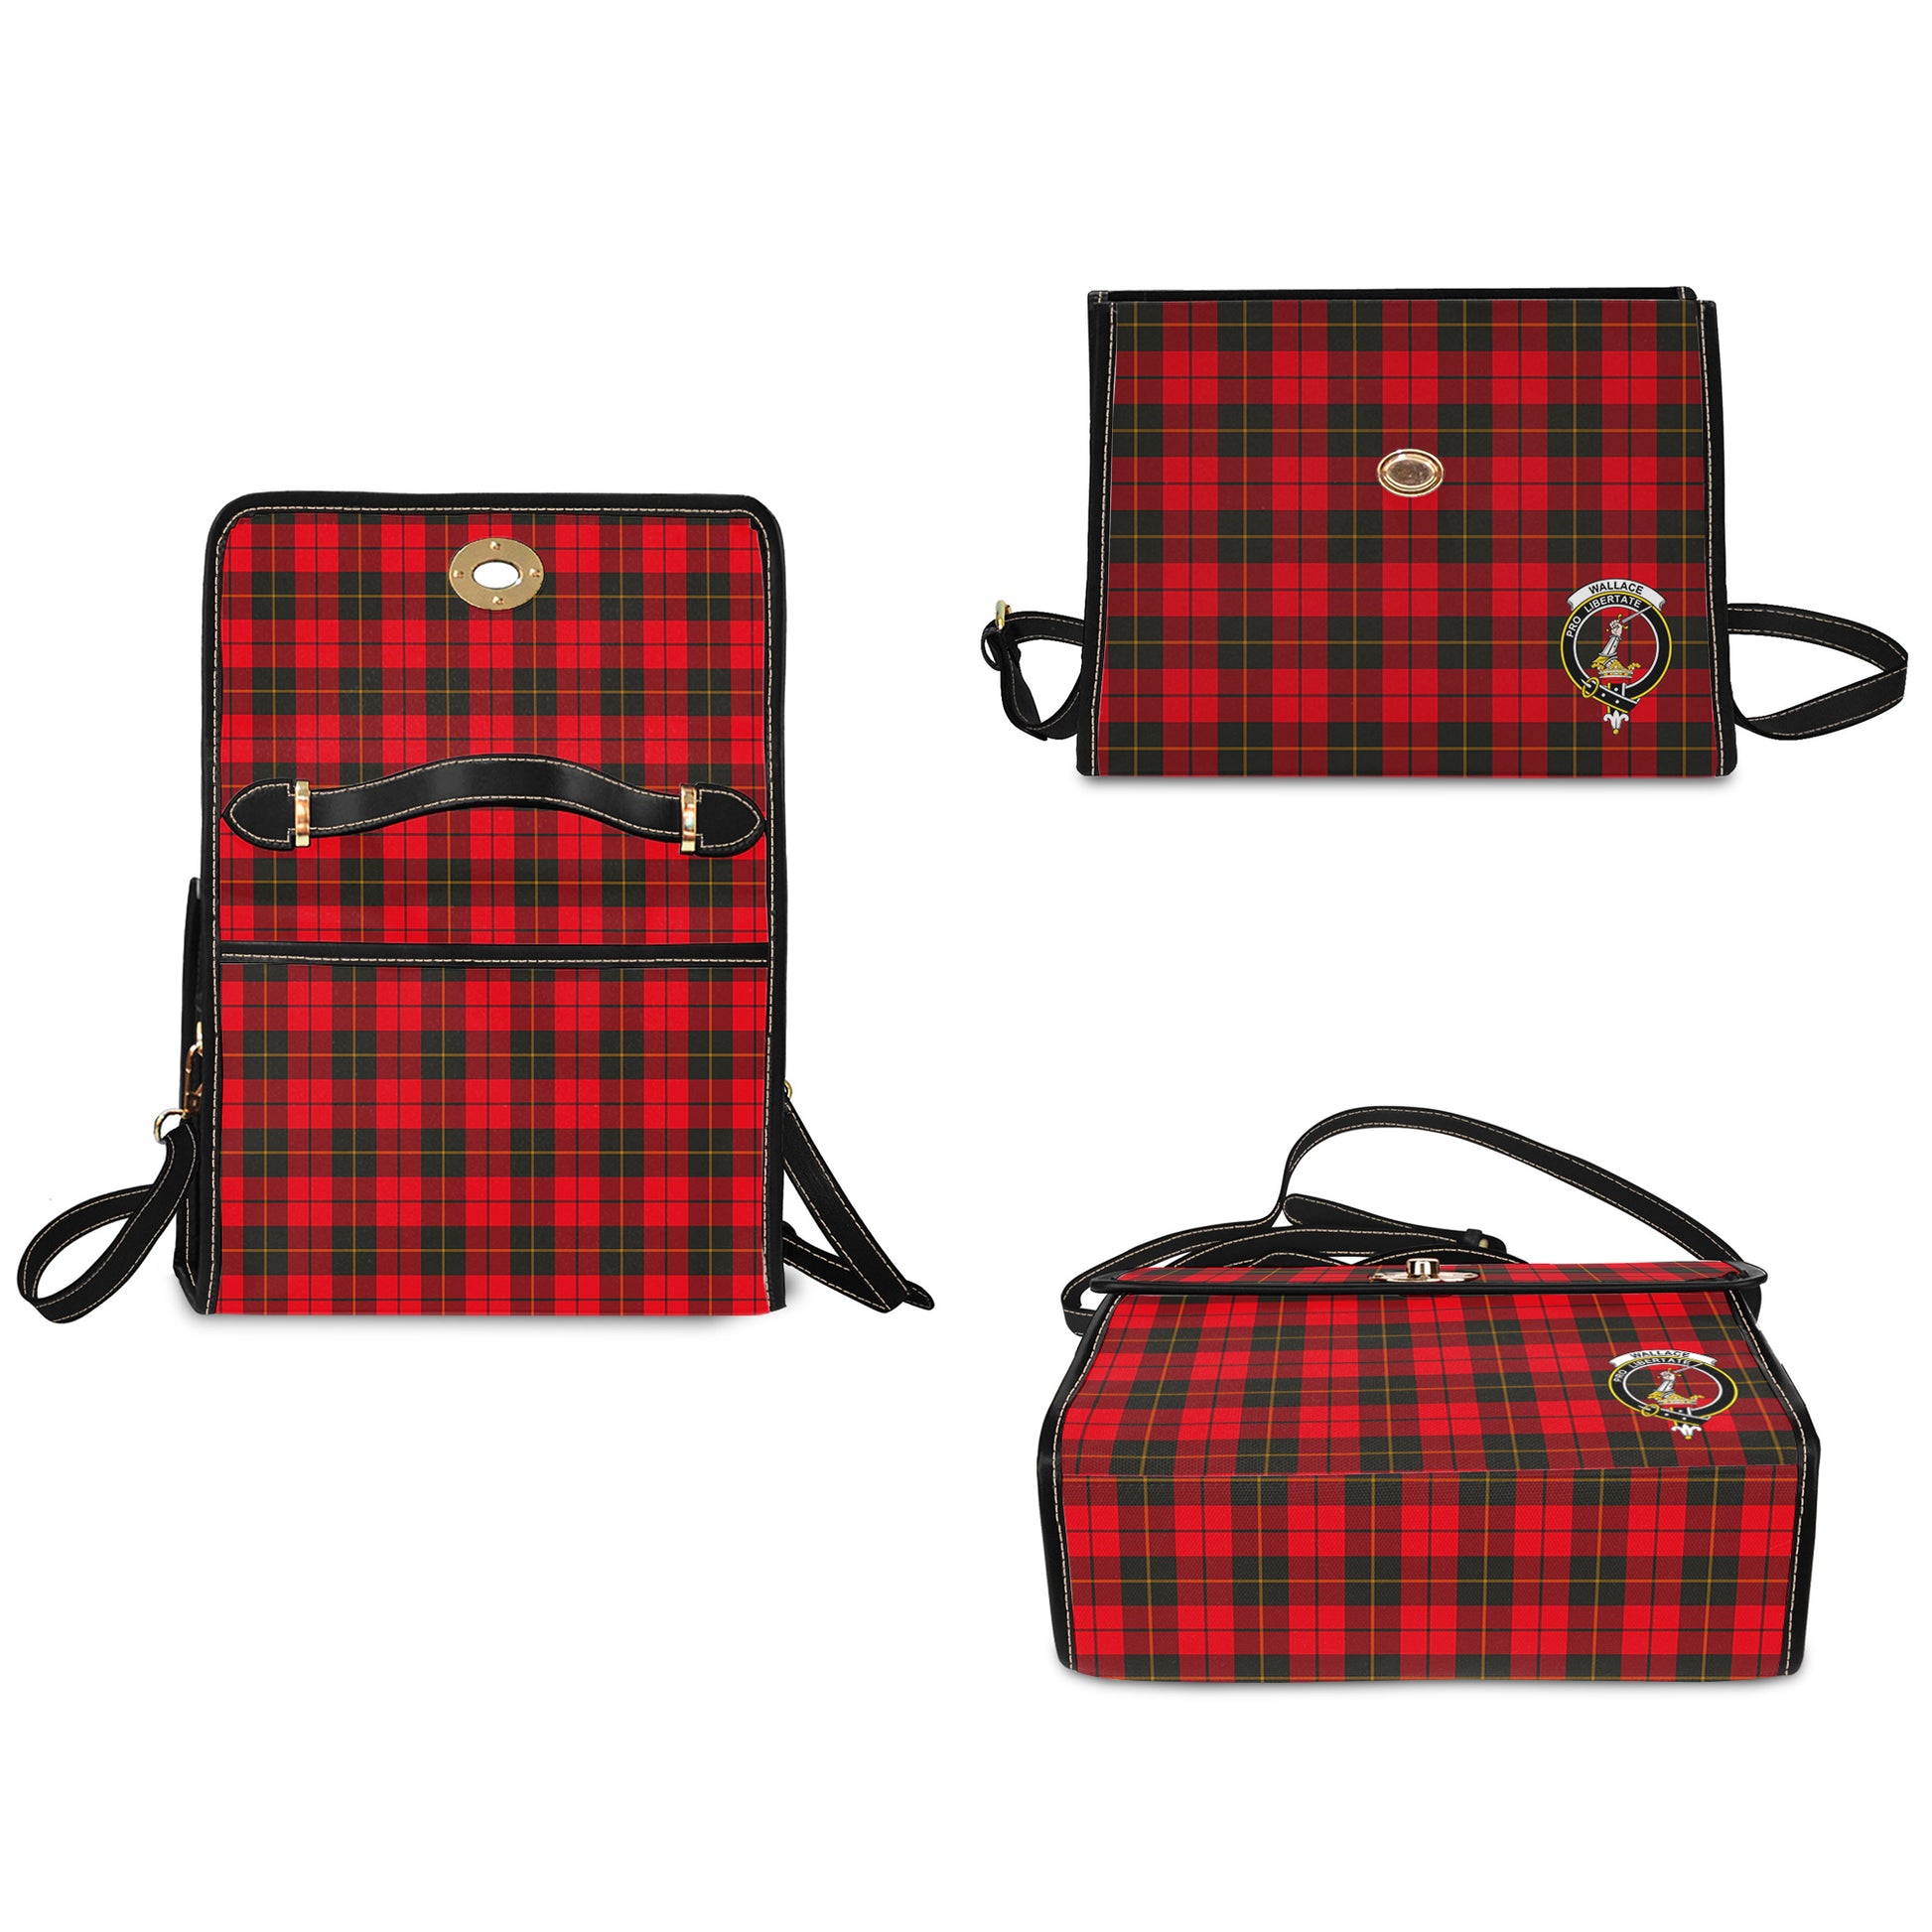 wallace-weathered-tartan-leather-strap-waterproof-canvas-bag-with-family-crest